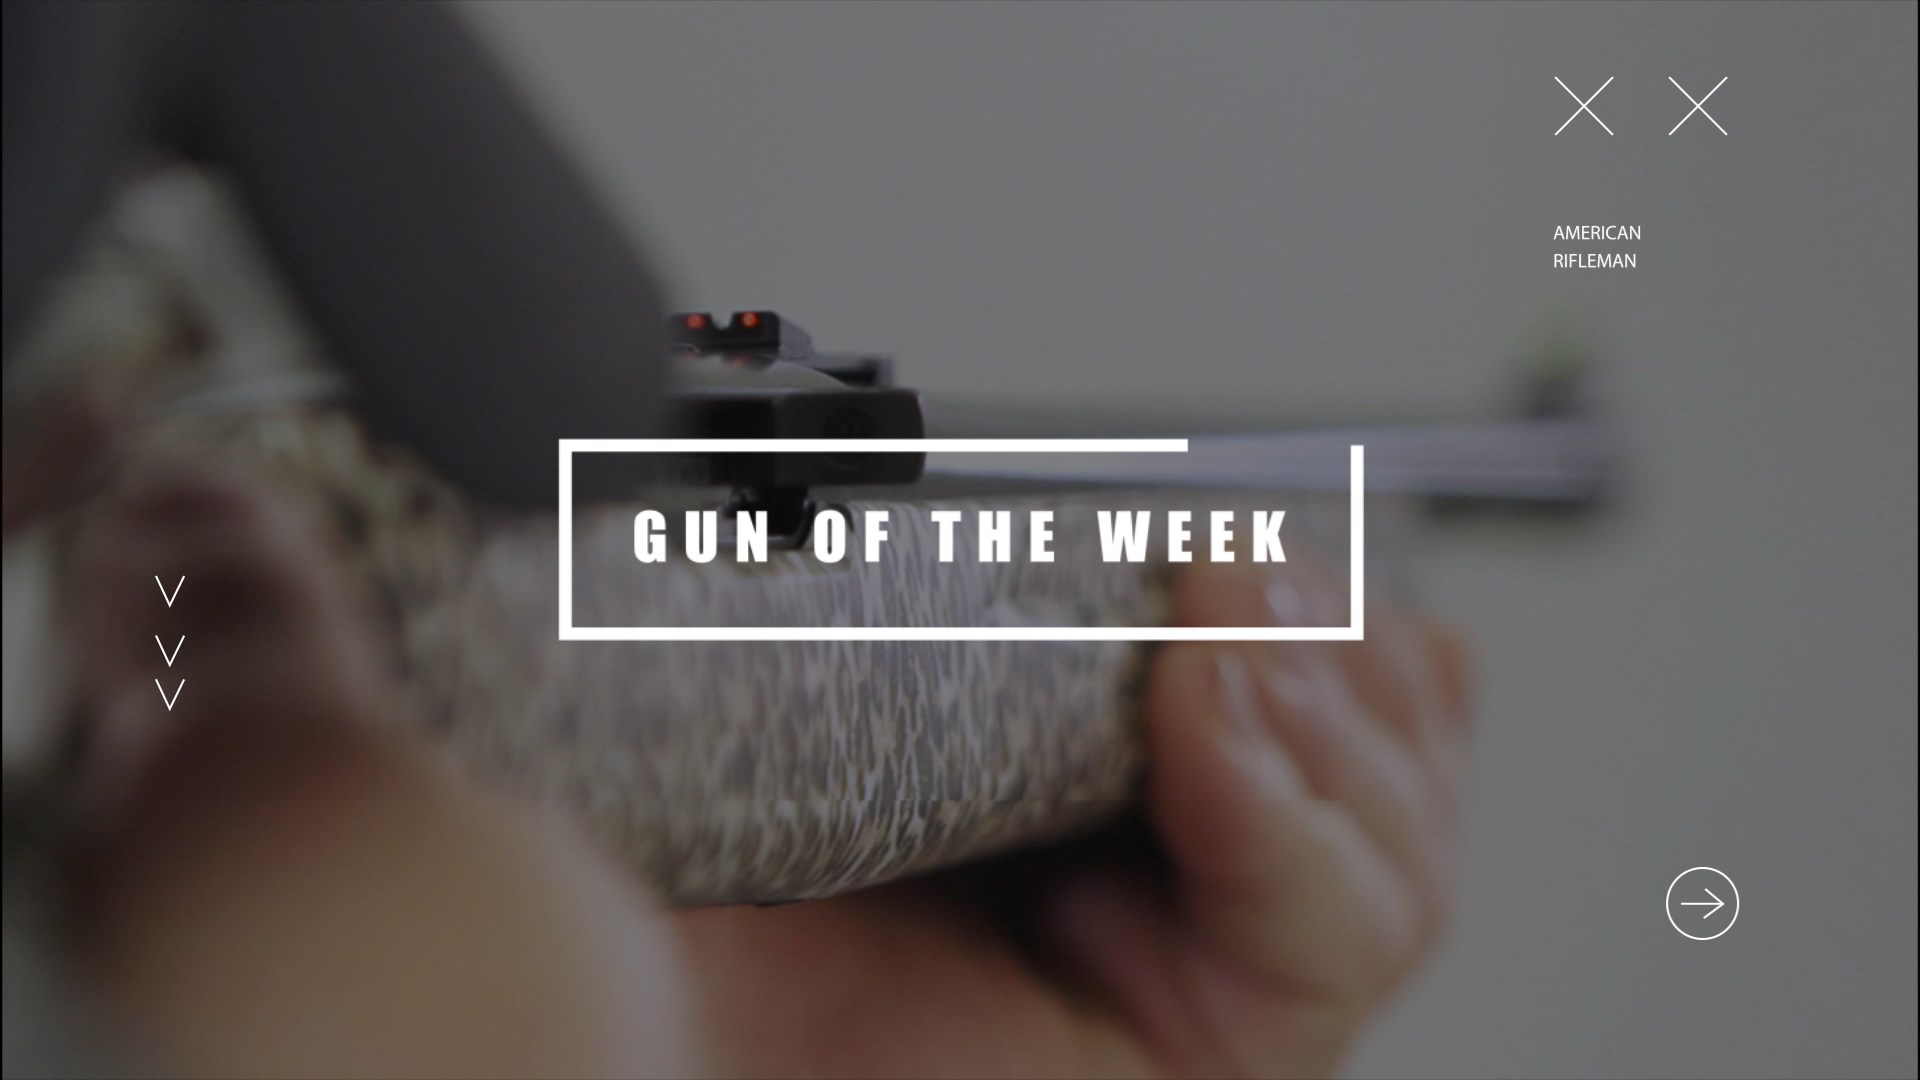 GUN OF THE WEEK title screen words on image Ruger 10/22 rifle .22 LR leopard print compact carbine background